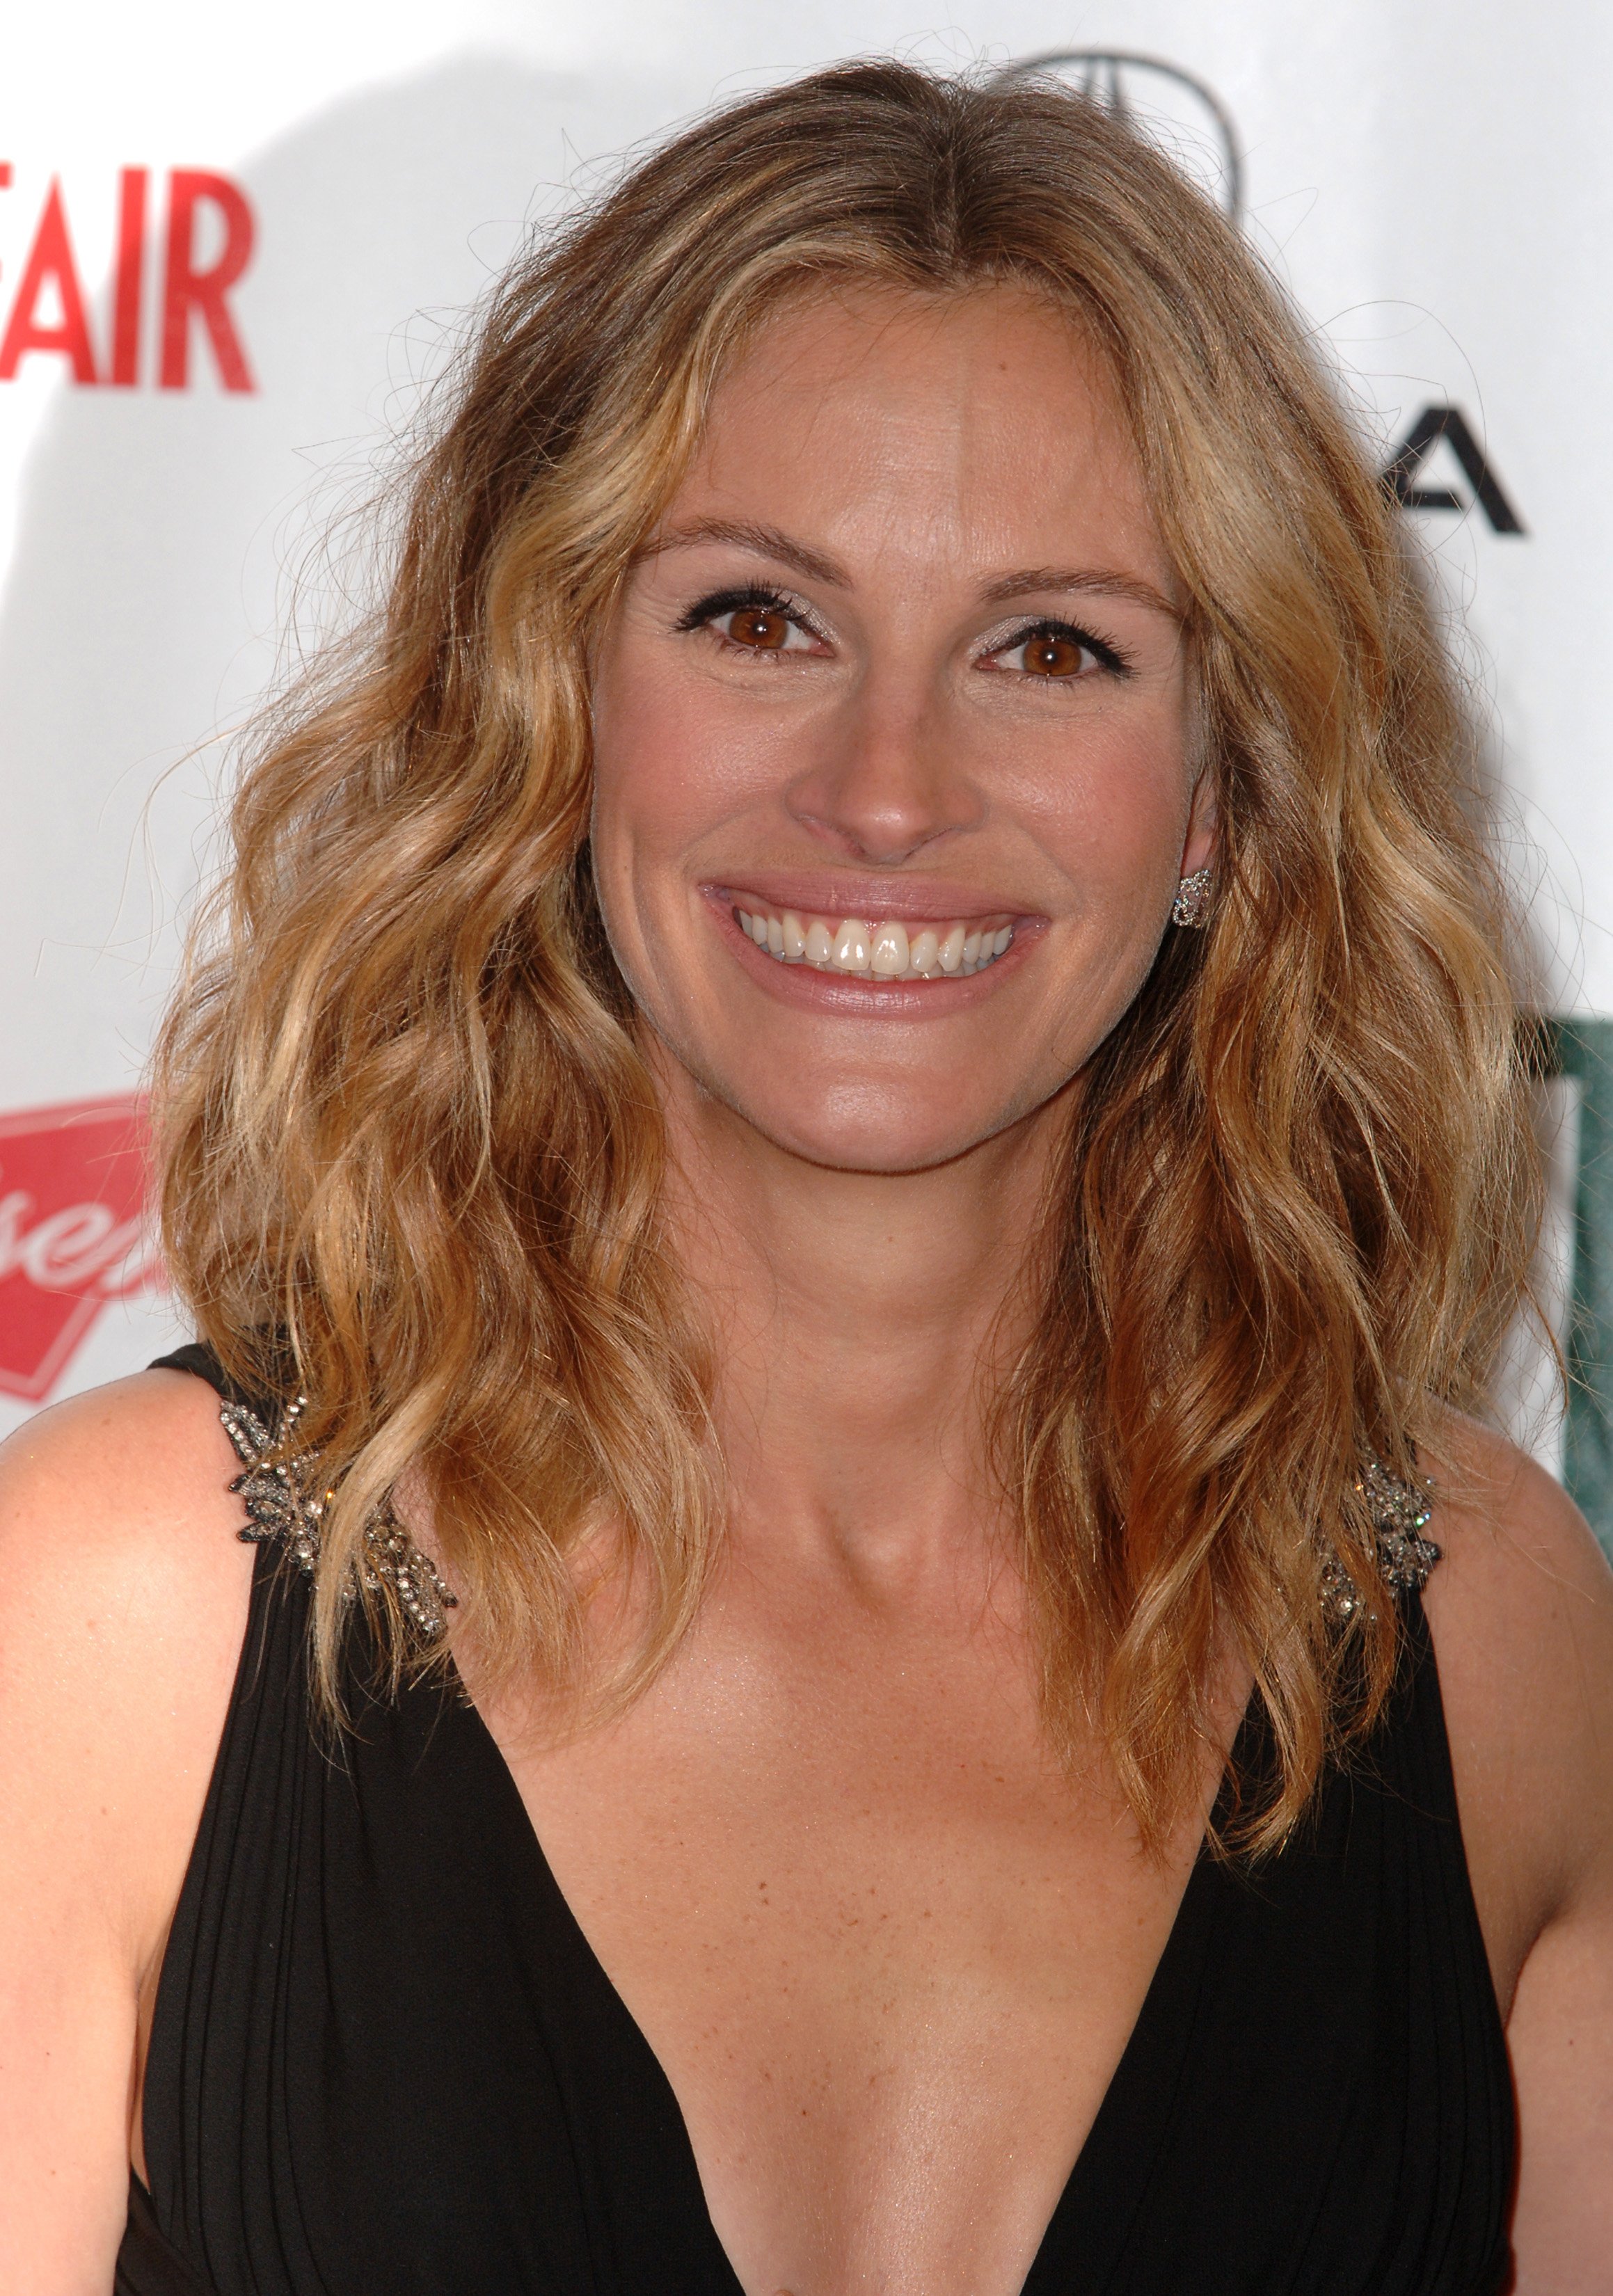 Julia Roberts at the 21st Annual American Cinematheque Award Honoring George Clooney. | Source: Getty Images